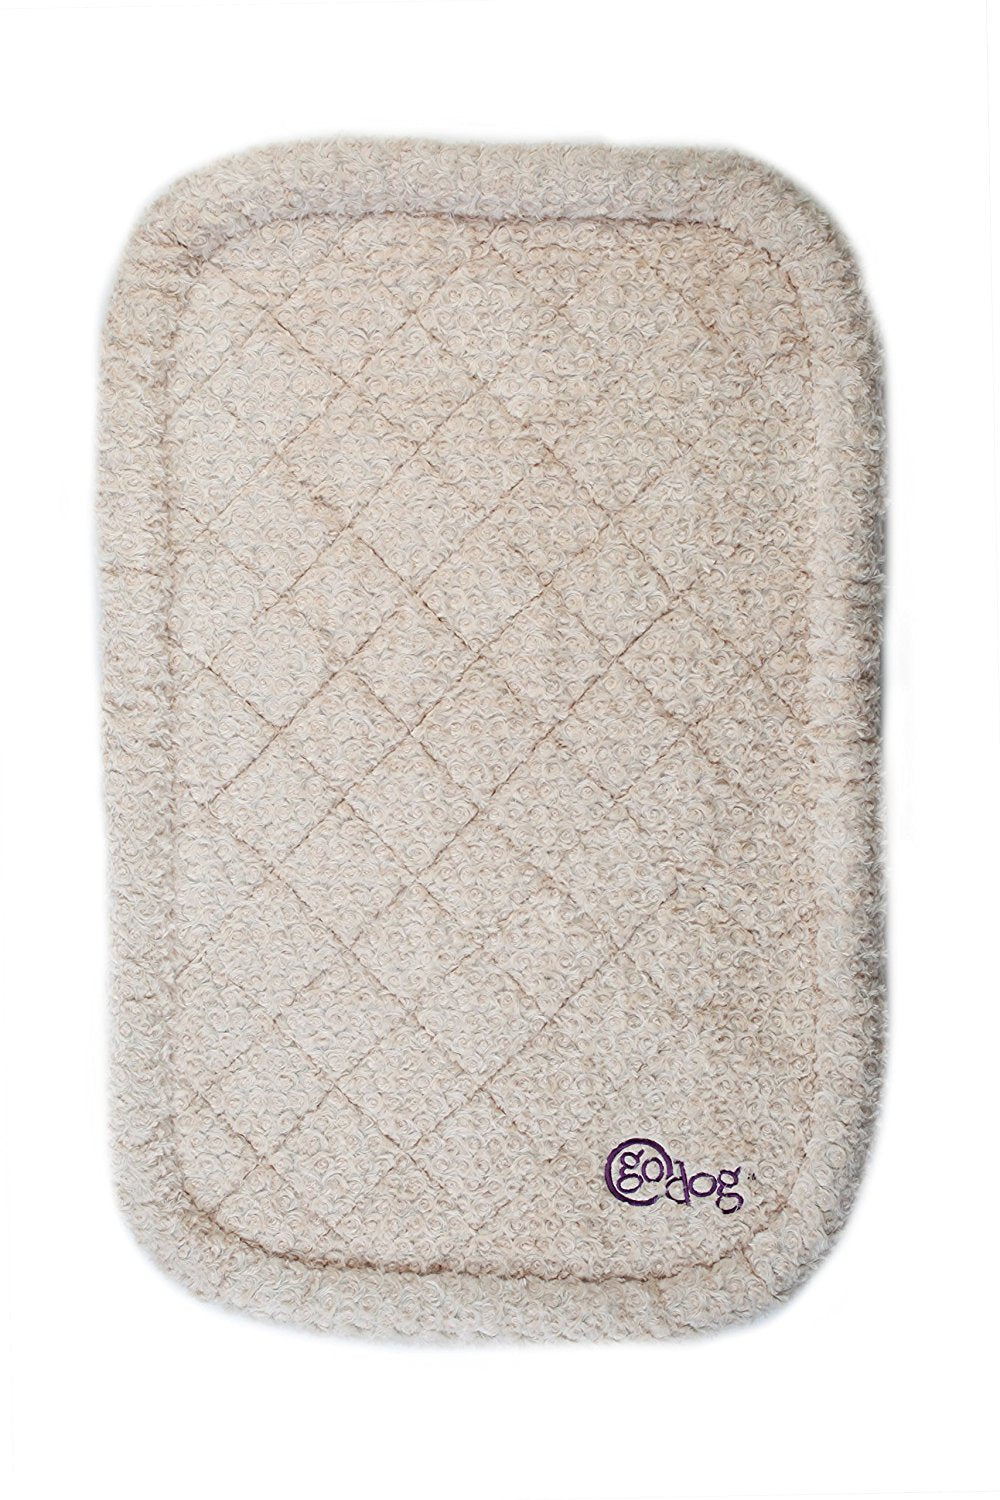 goDog BedZzz Bubble Bolster with Chew Guard Technology, X-Small Shag Tan